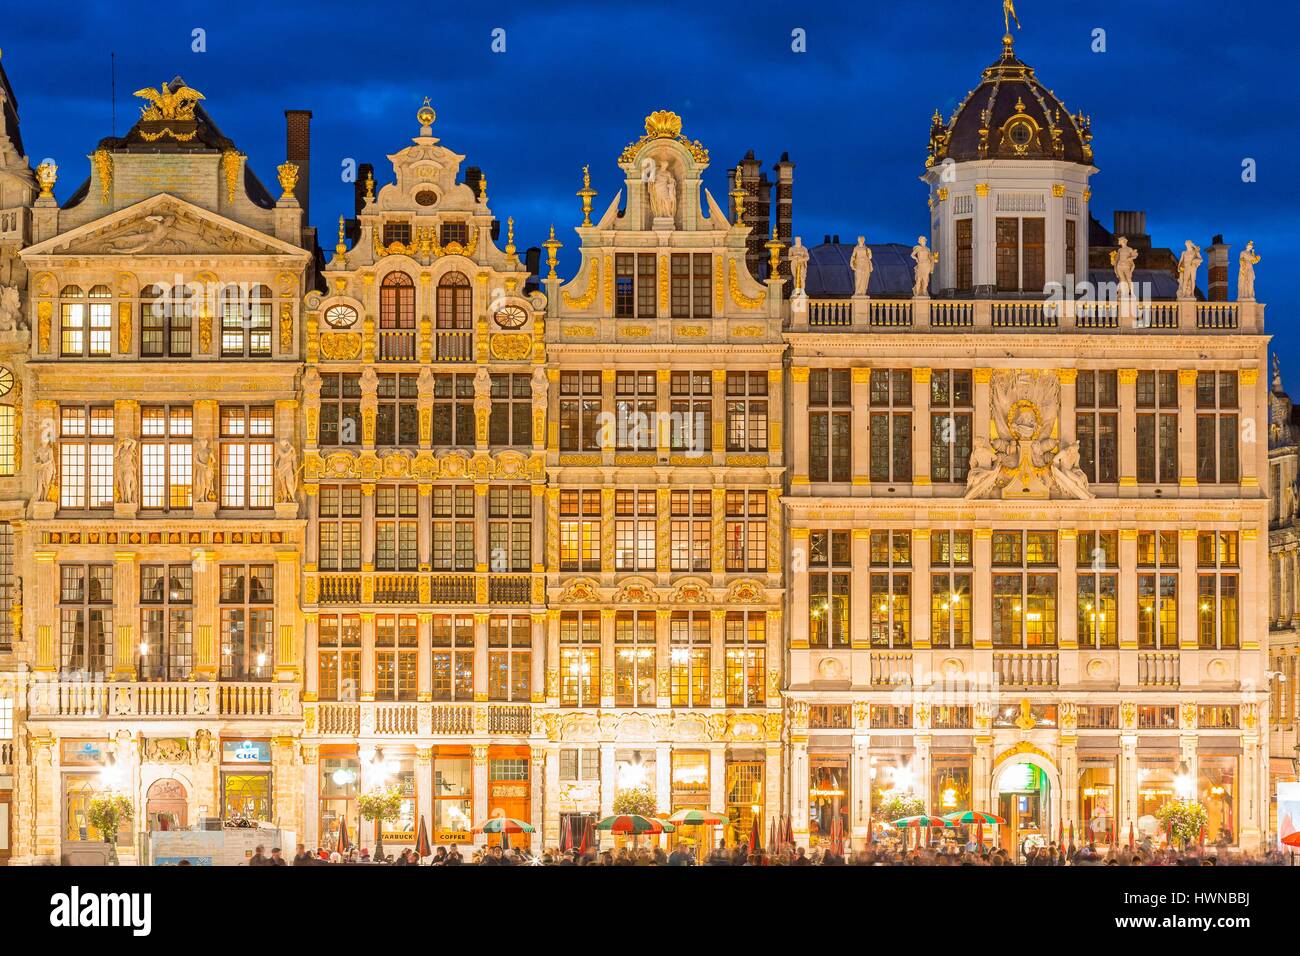 Belgium, Brussels, Grand Place (Grote Markt), listed as World Heritage by UNESCO, houses of the 17th century guilds, from left to right, Maison de la Louve, Maison du Sac, Maison de la Brouette and Maison du Roi d'Espagne Stock Photo